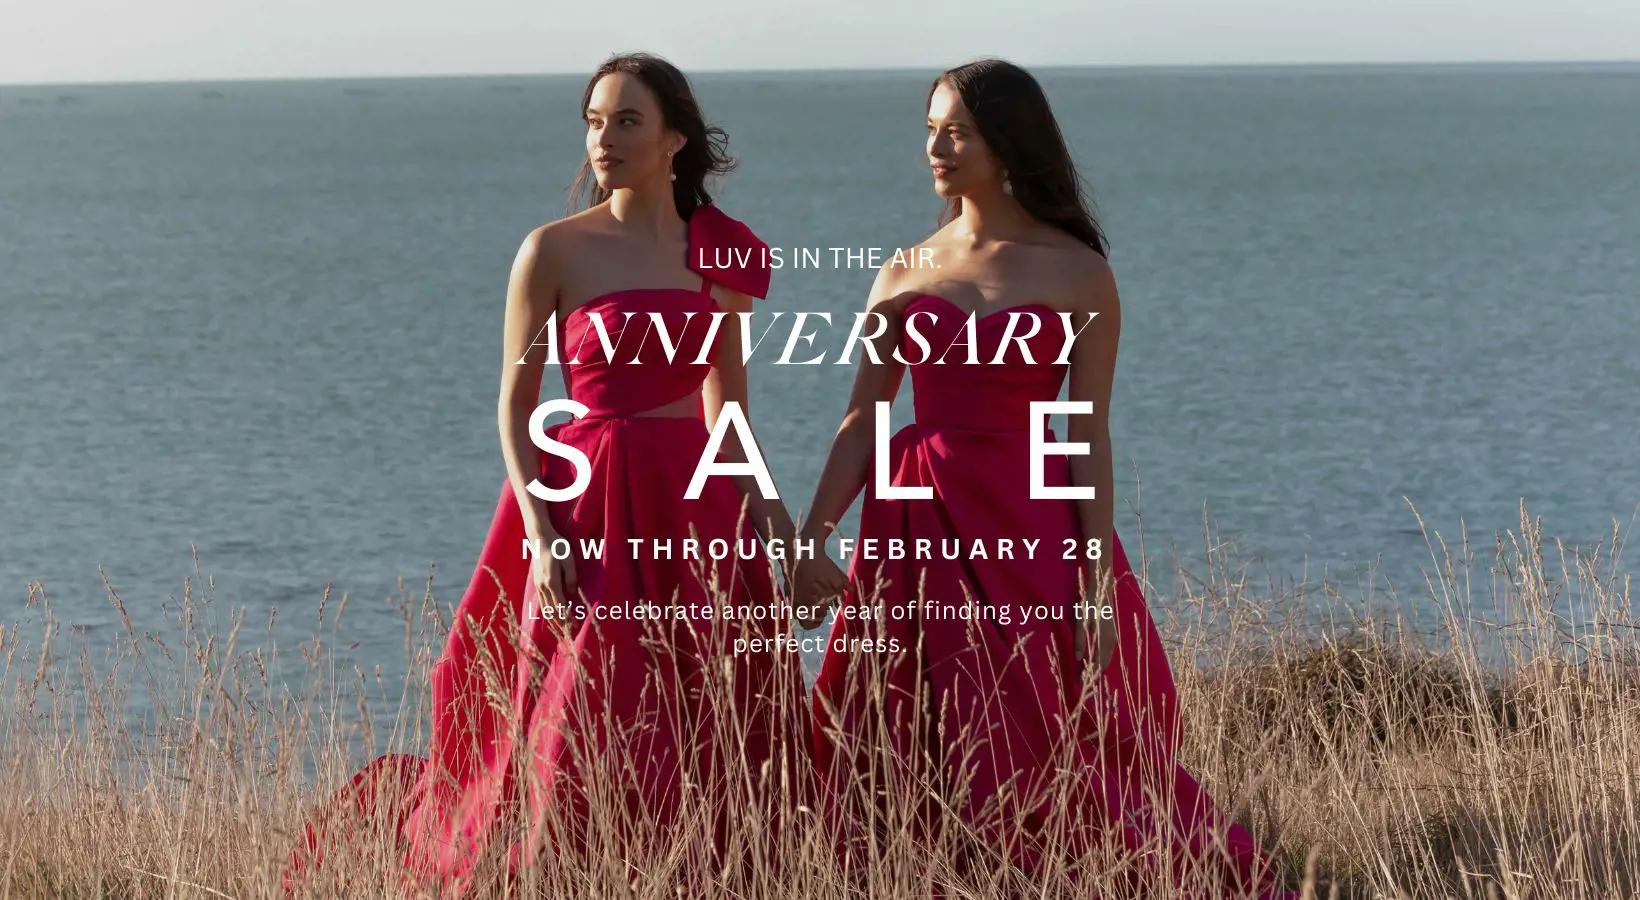 Luv Bridal Anniversary Sale going on now